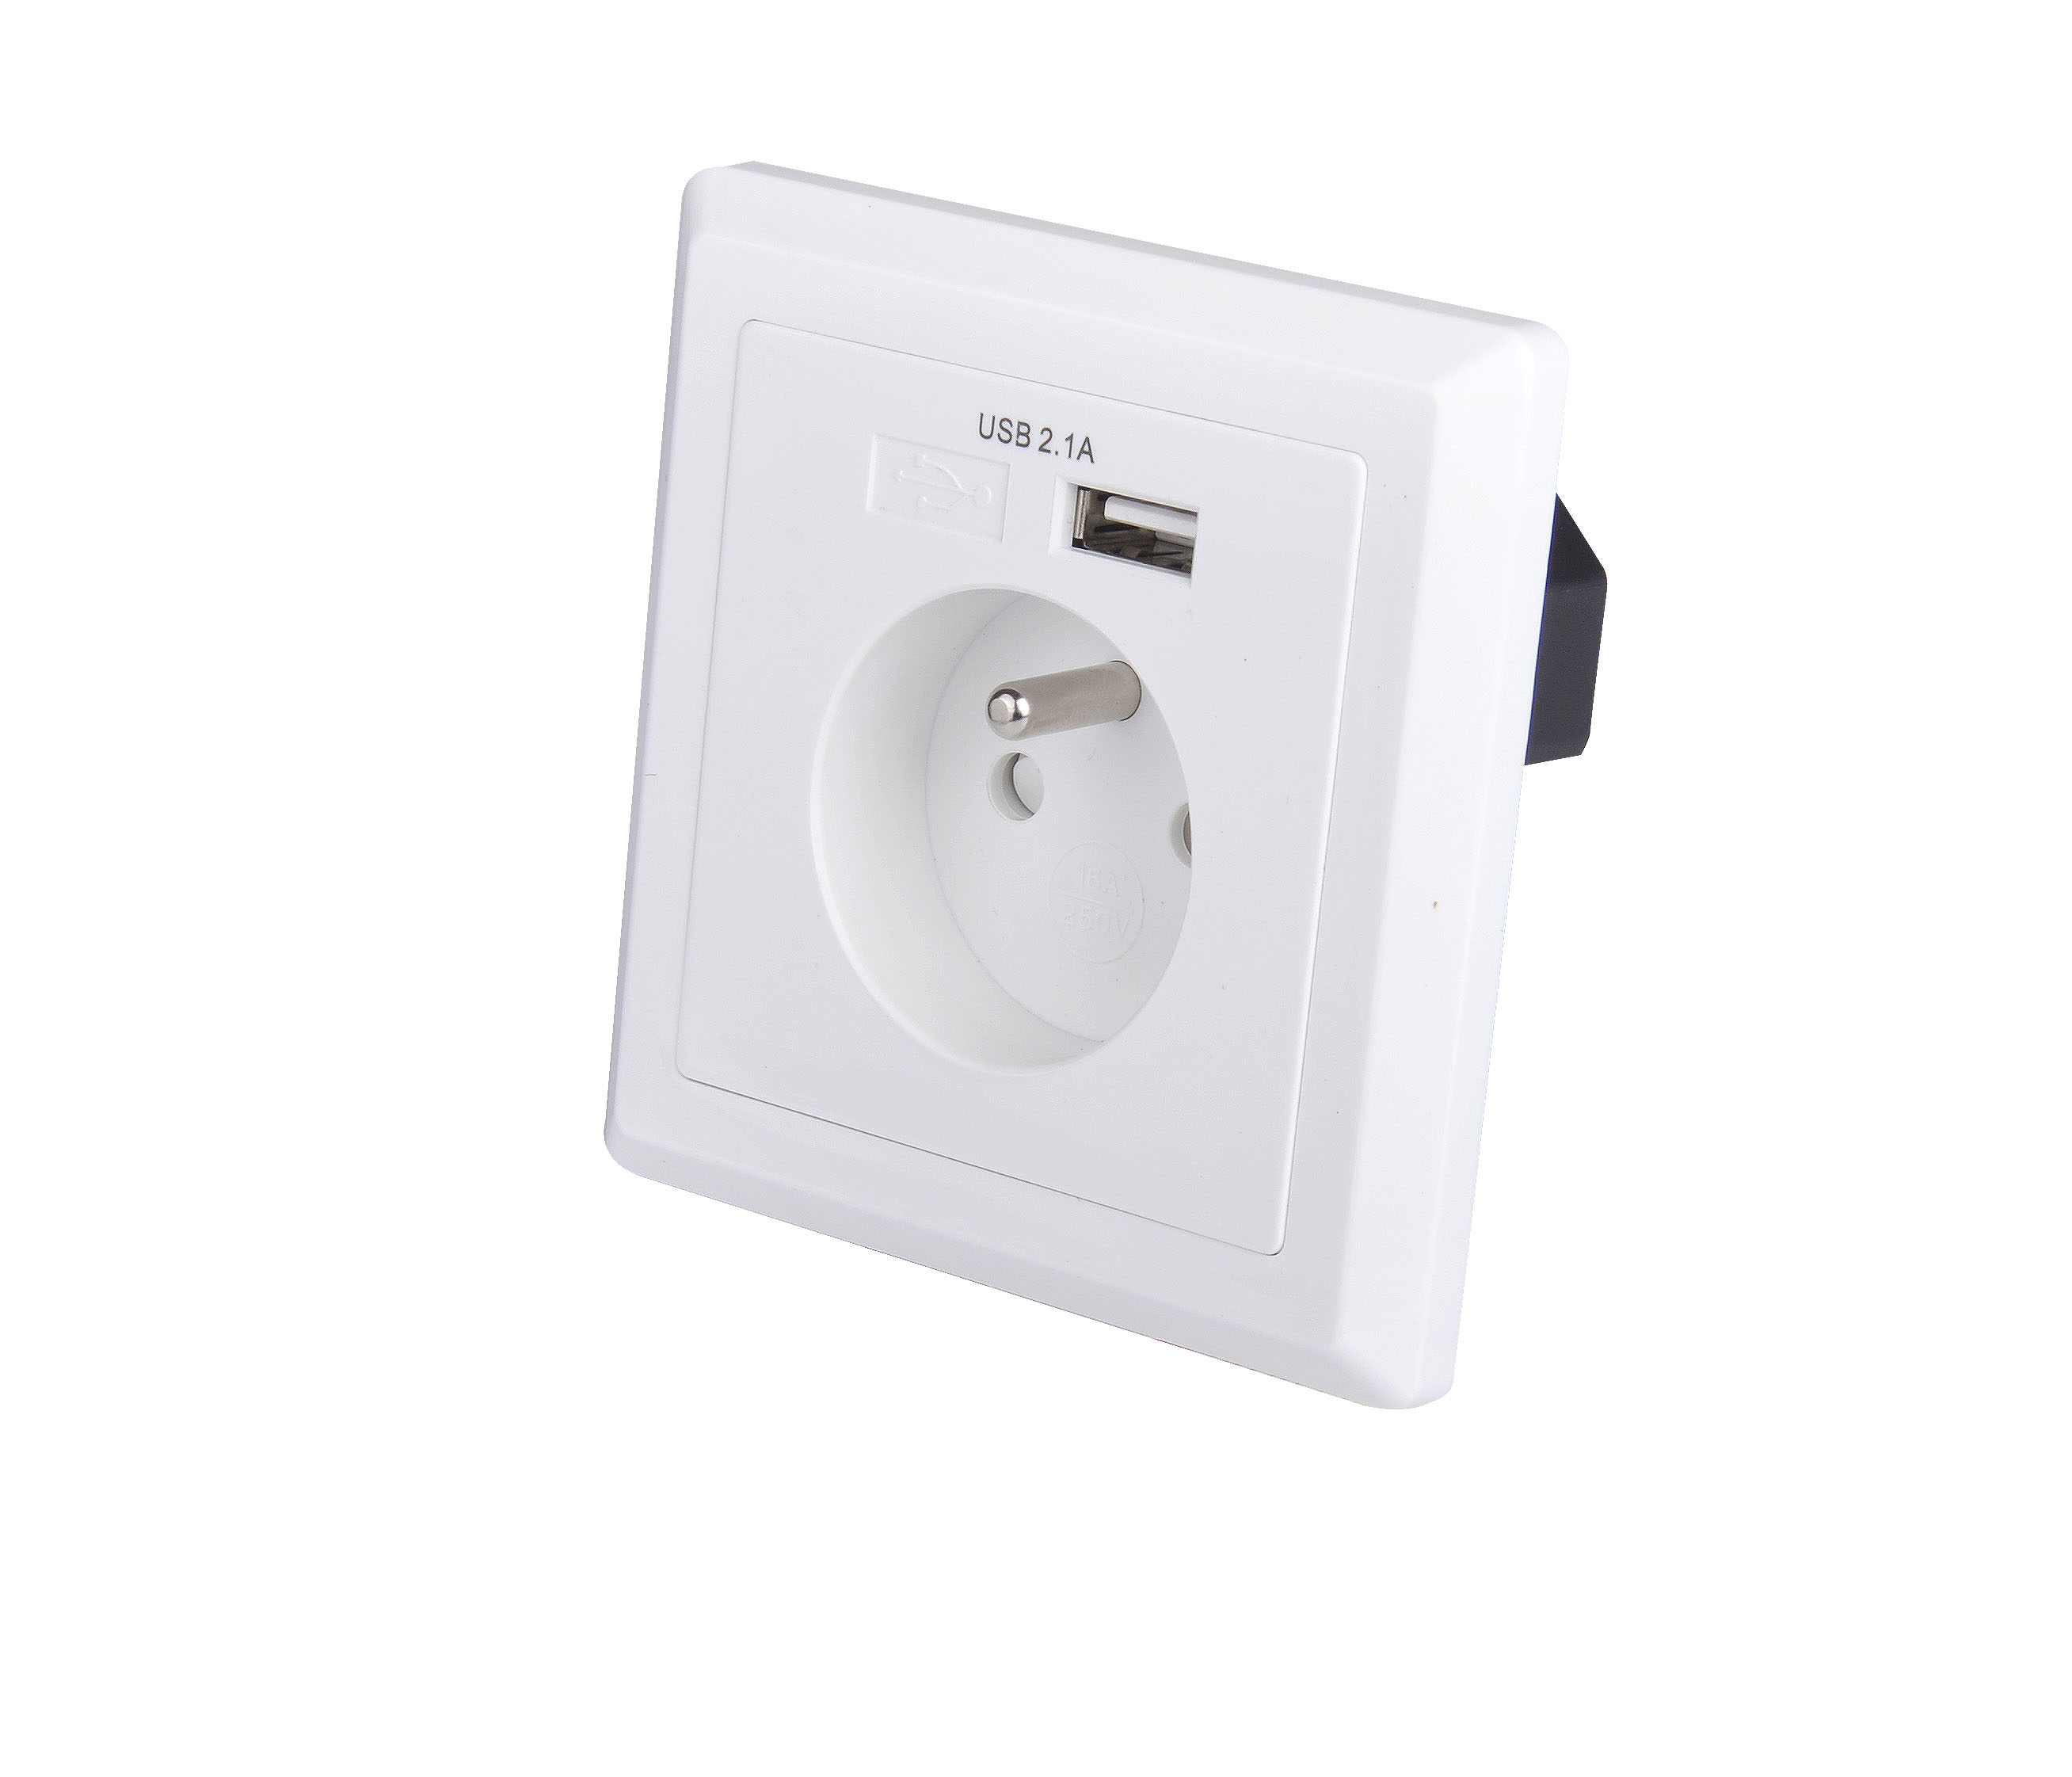 EU schuko socket 86 type French wall plate with 5V 2.1A USB wall charger